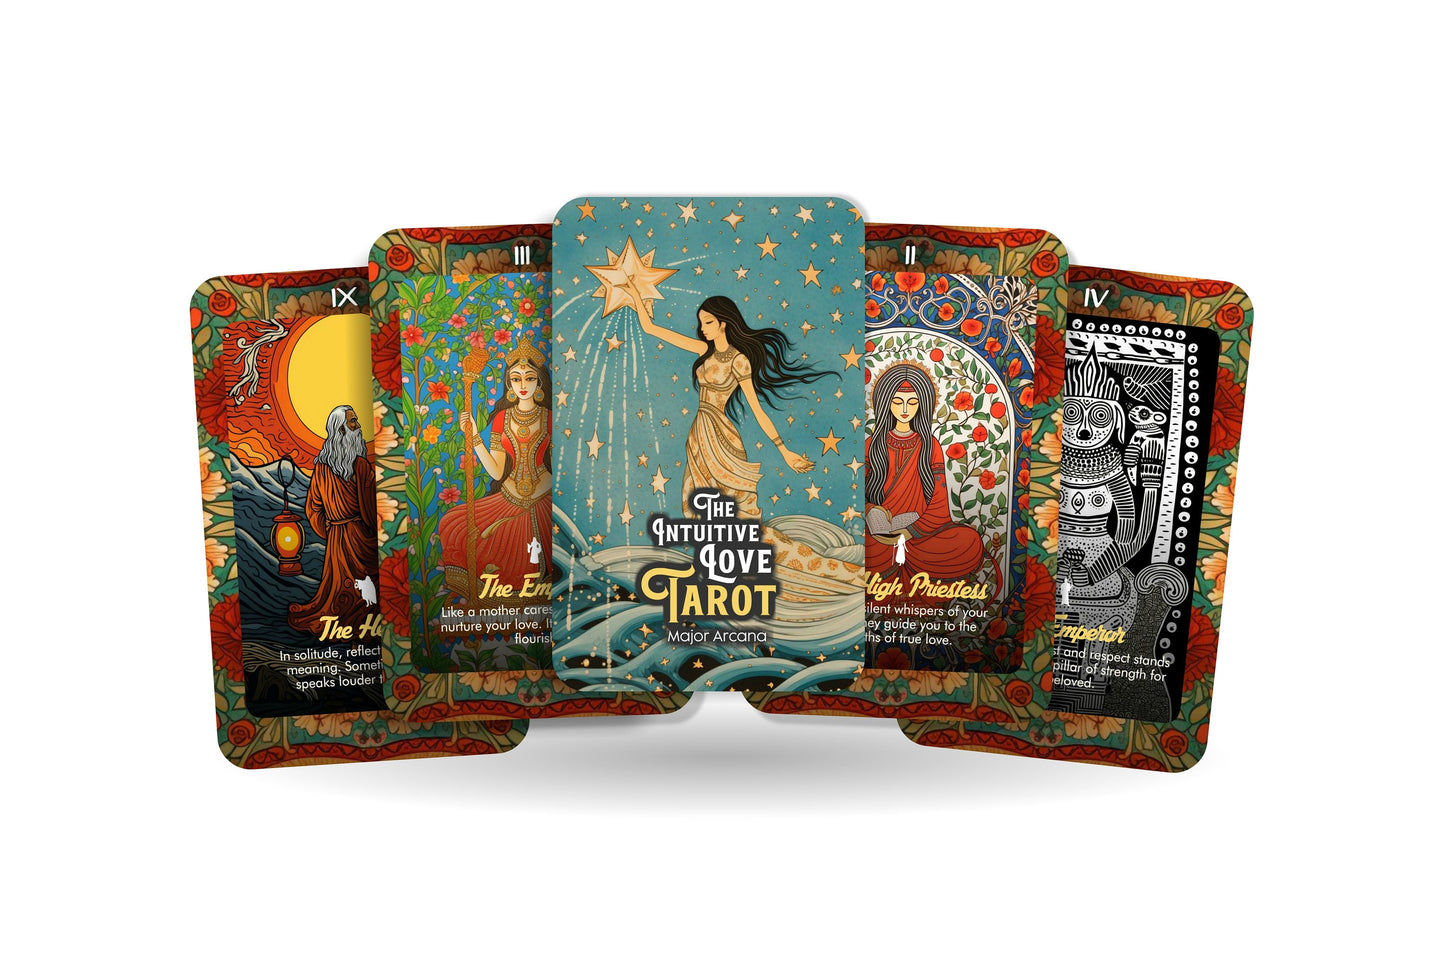 The Intuitive love Tarot - The Cards Know What the Heart Feels - Major Arcana - Divination tools